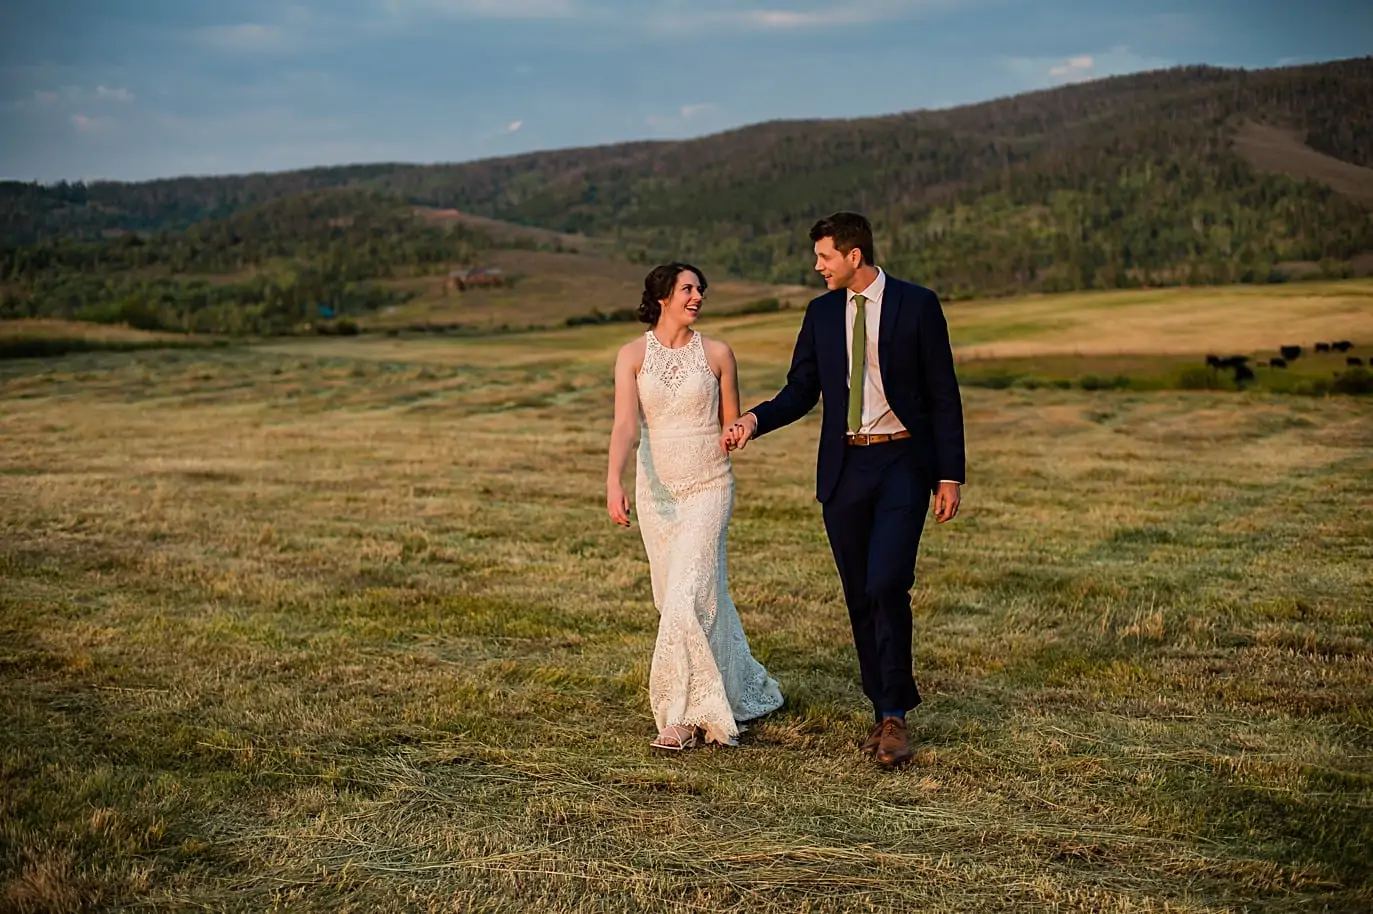 sunset walk in the fields at a wedding in the Colorado mountains